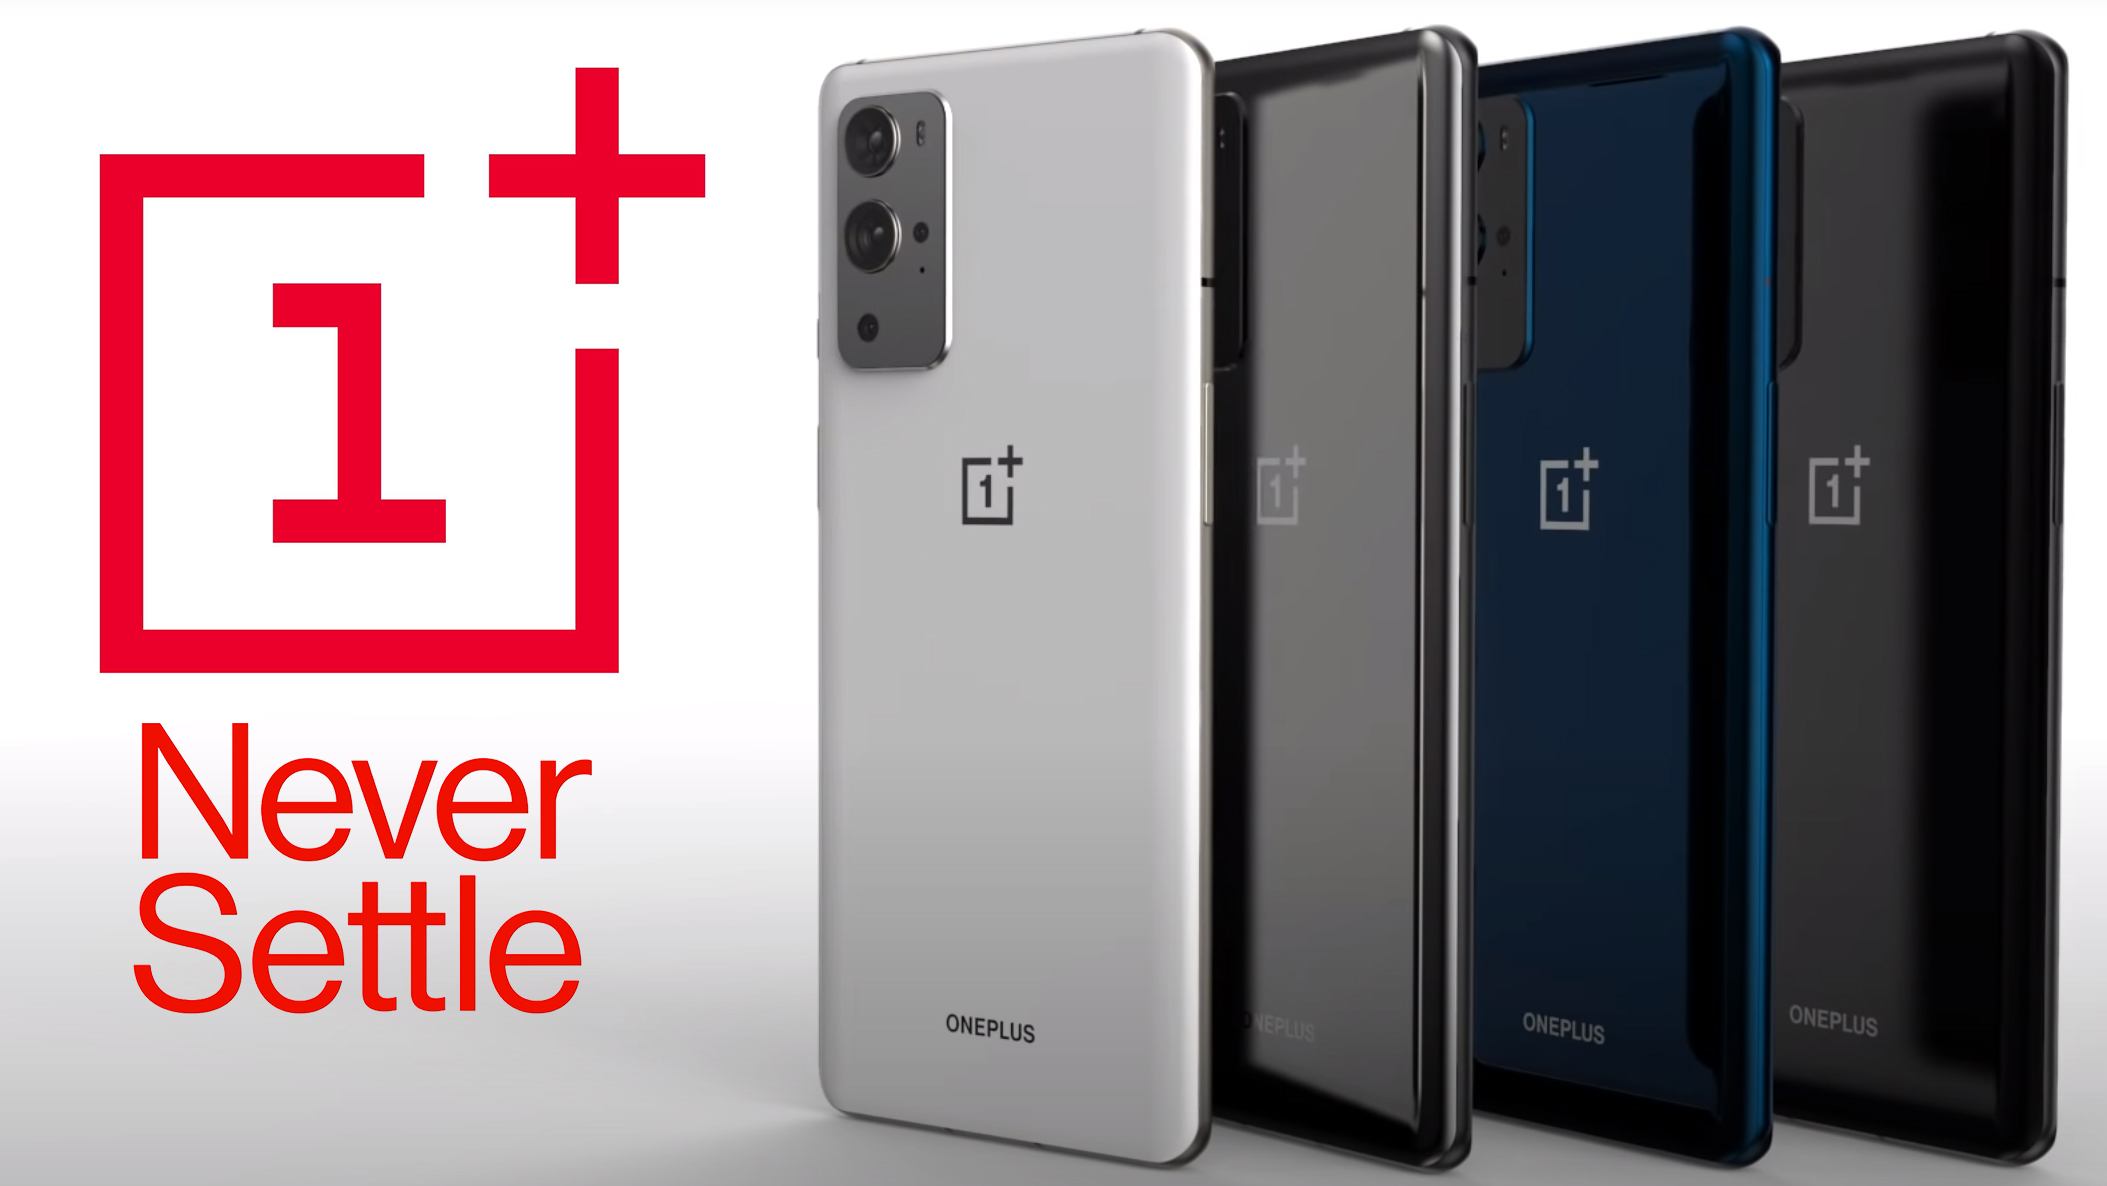 Oneplus 9 Pro 5g Video Breaks Cover Showing Galaxy S21 Killing Super Phone T3